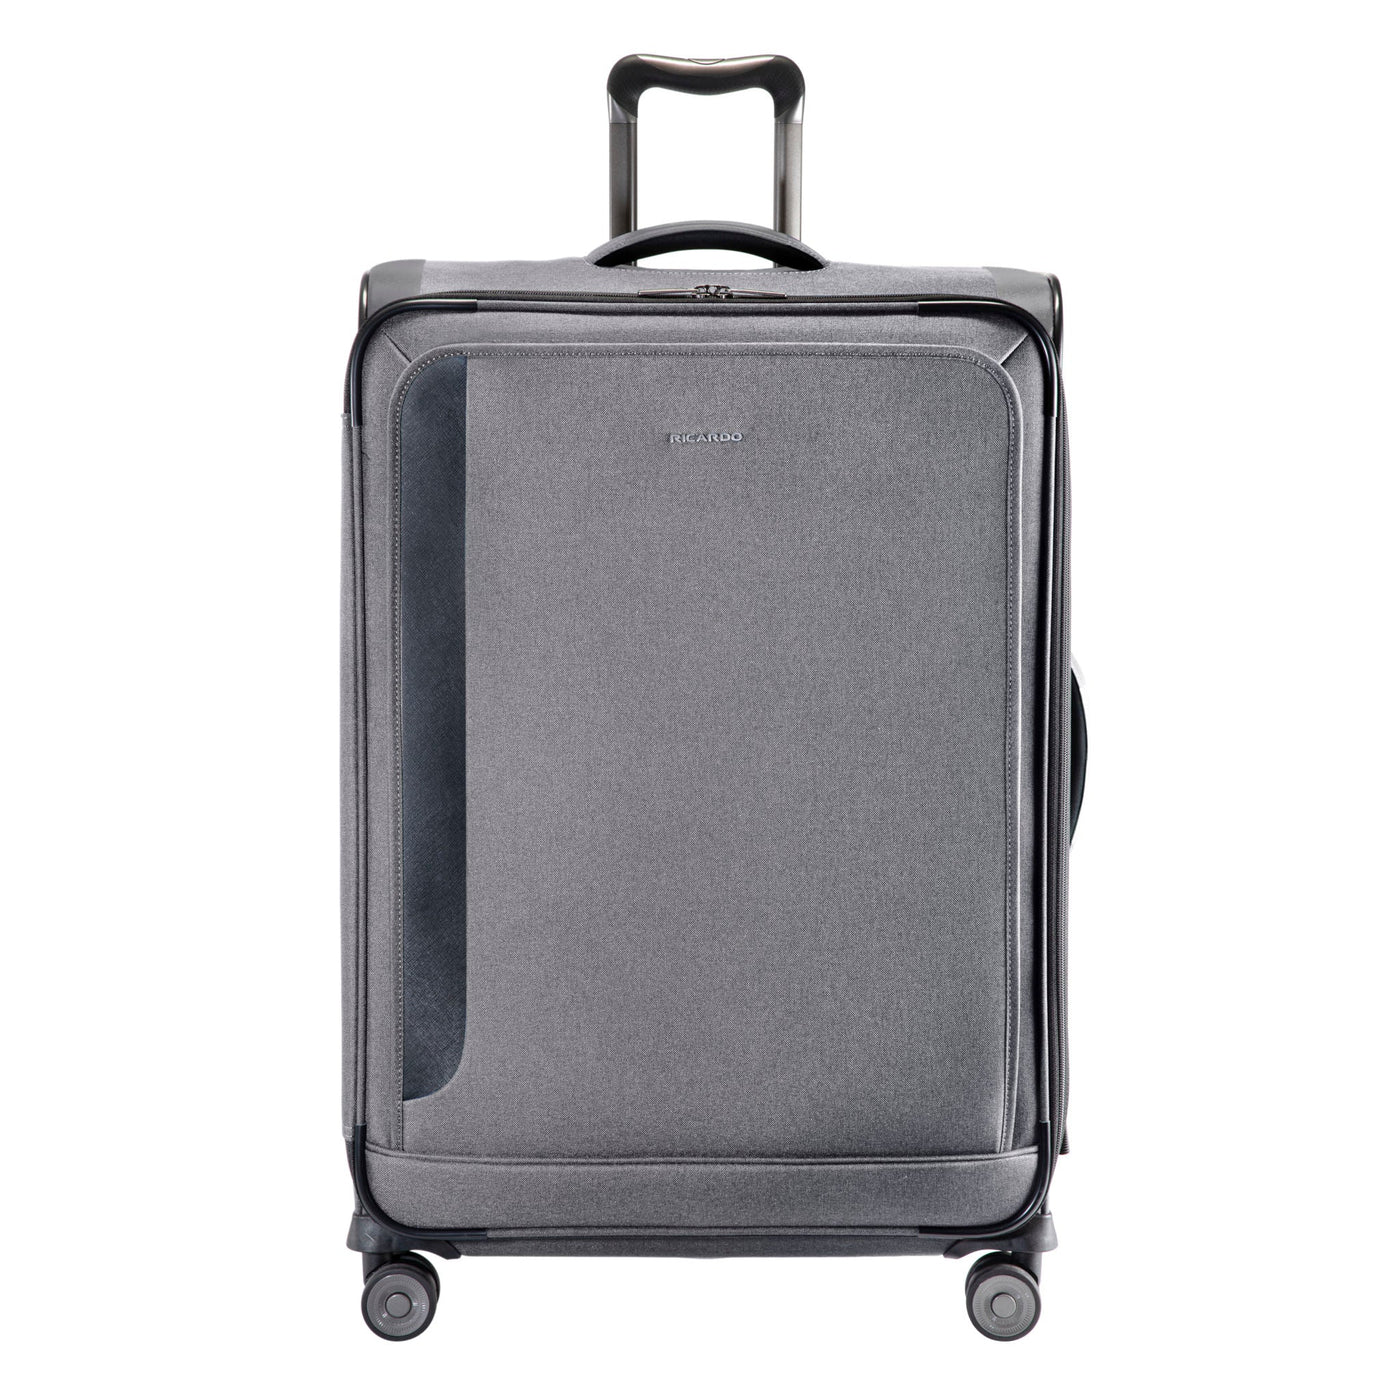 Biaggi Zipsak Boost - Expandable Carry-On Luggage with Trolley Handle - Perfect for Travelers on The Go! (Navy Blue)